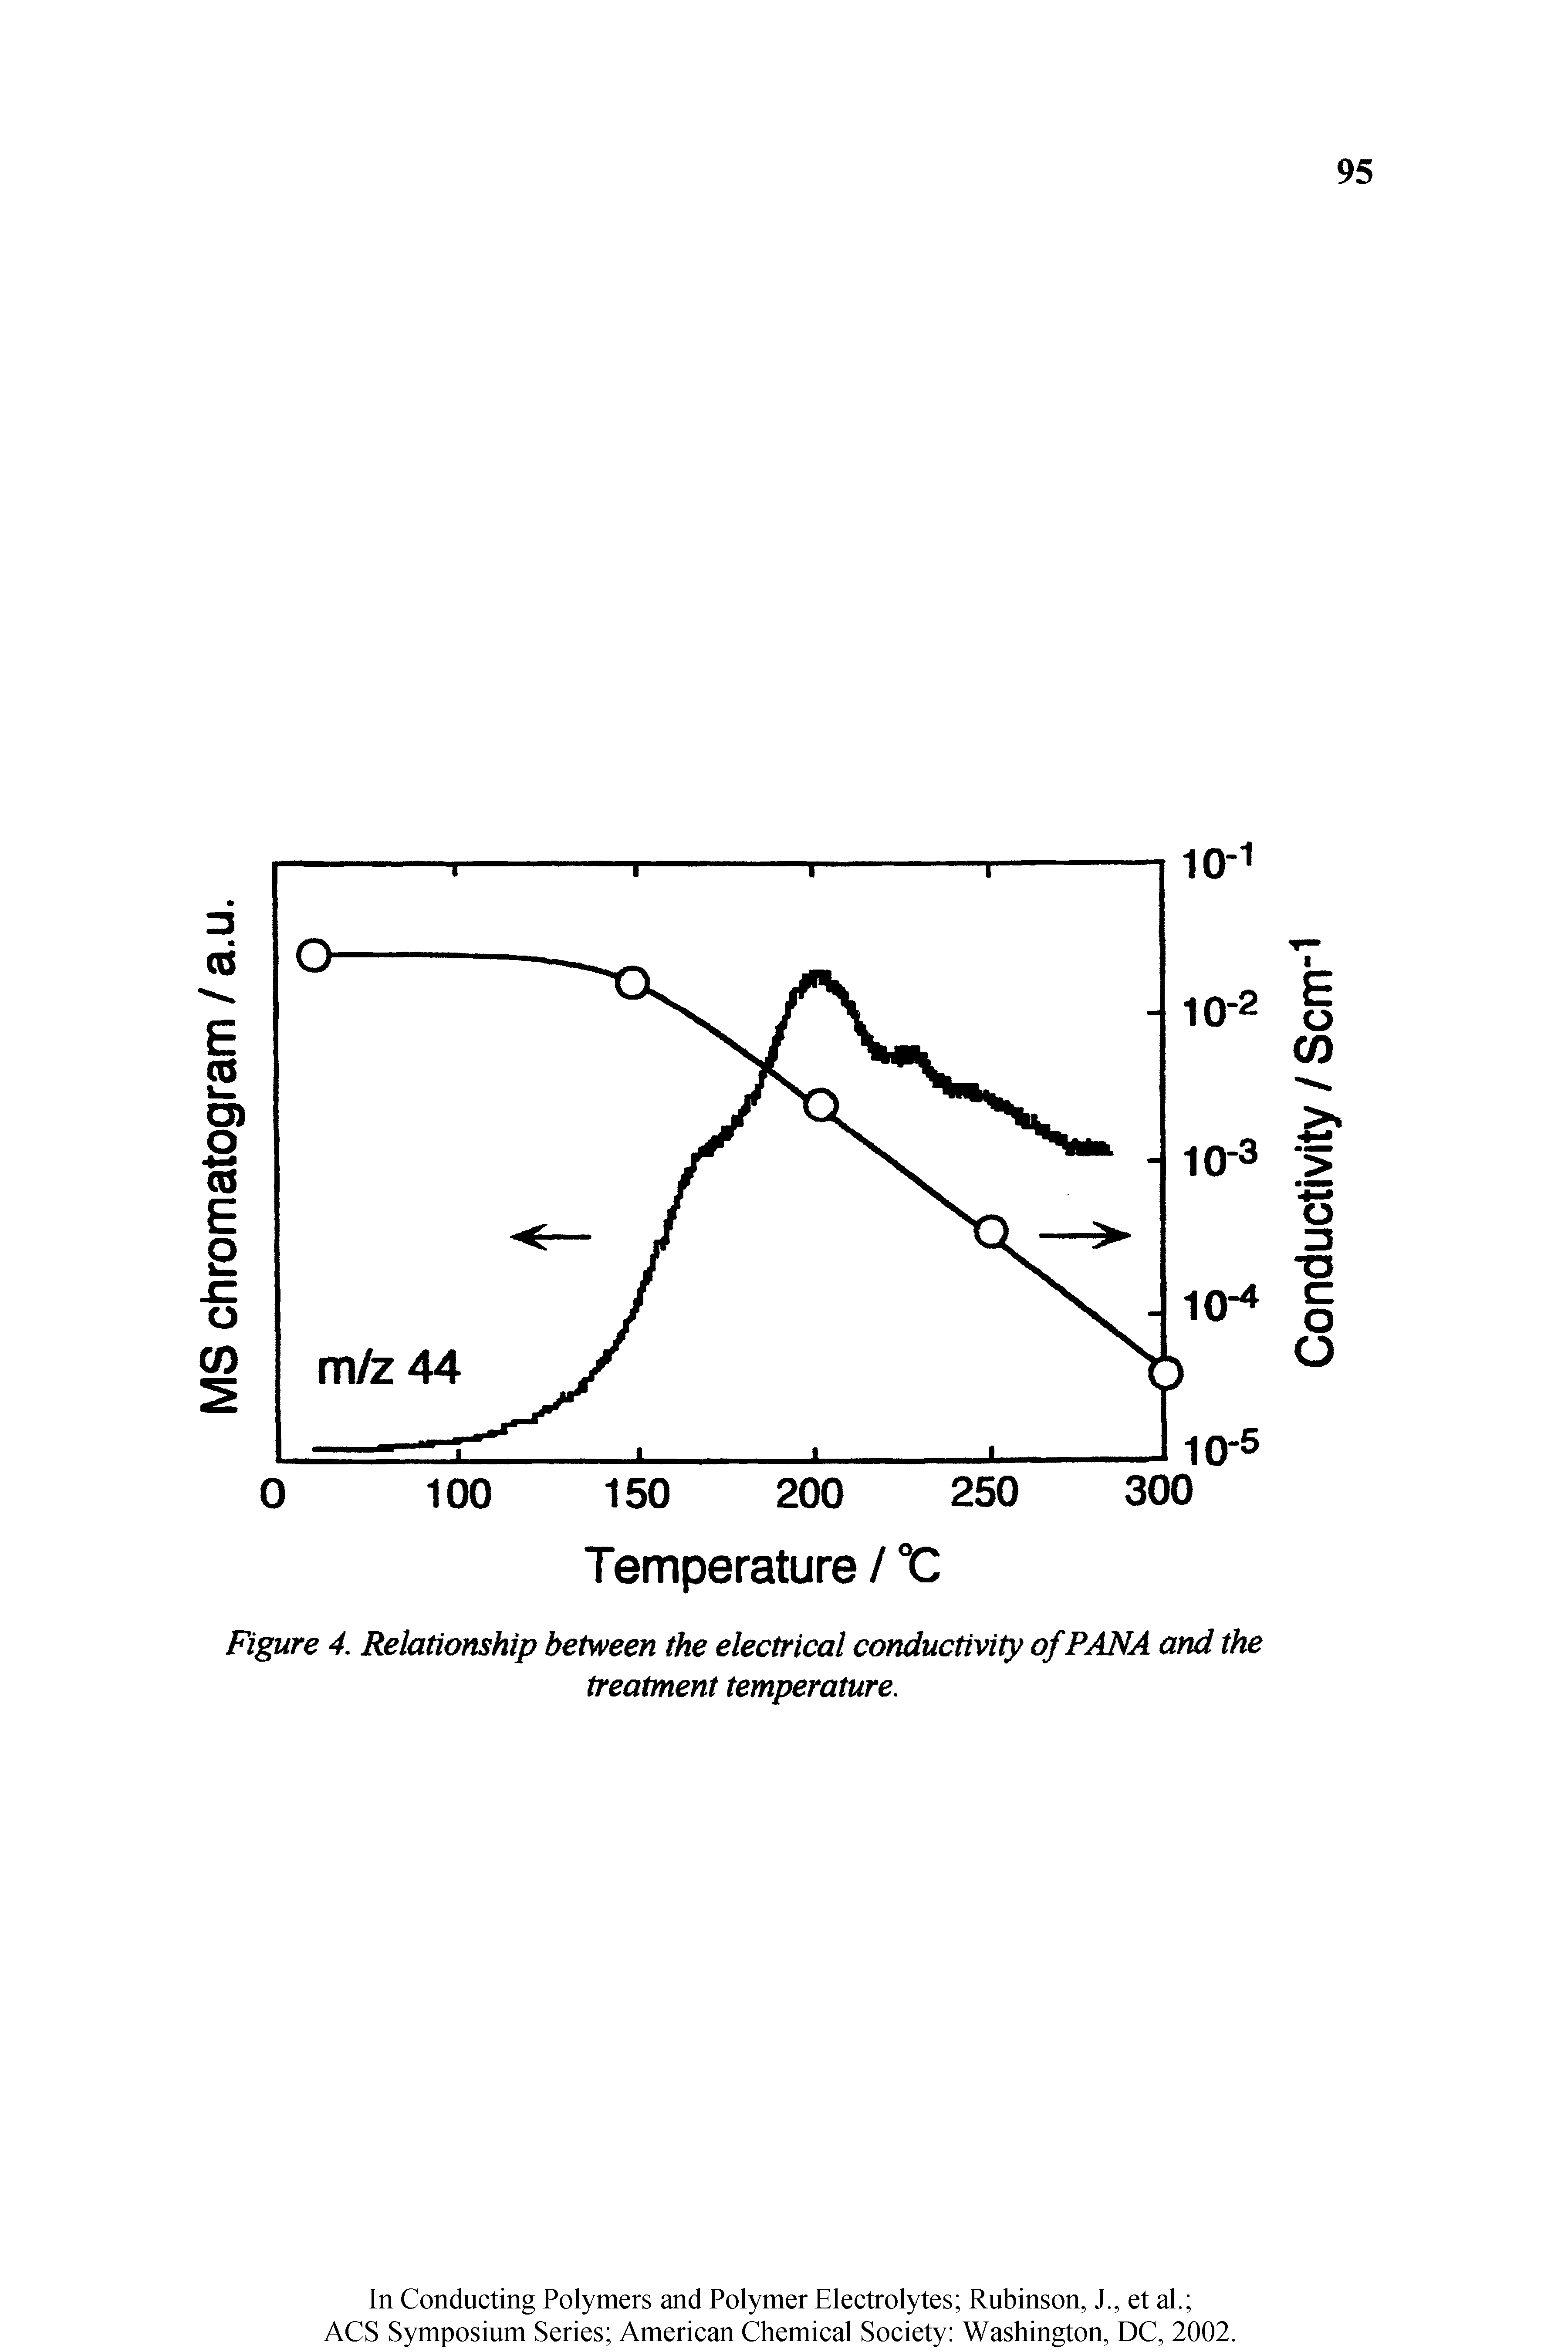 Figure 4. Relationship between the electrical conductivity of PANA and the treatment temperature.